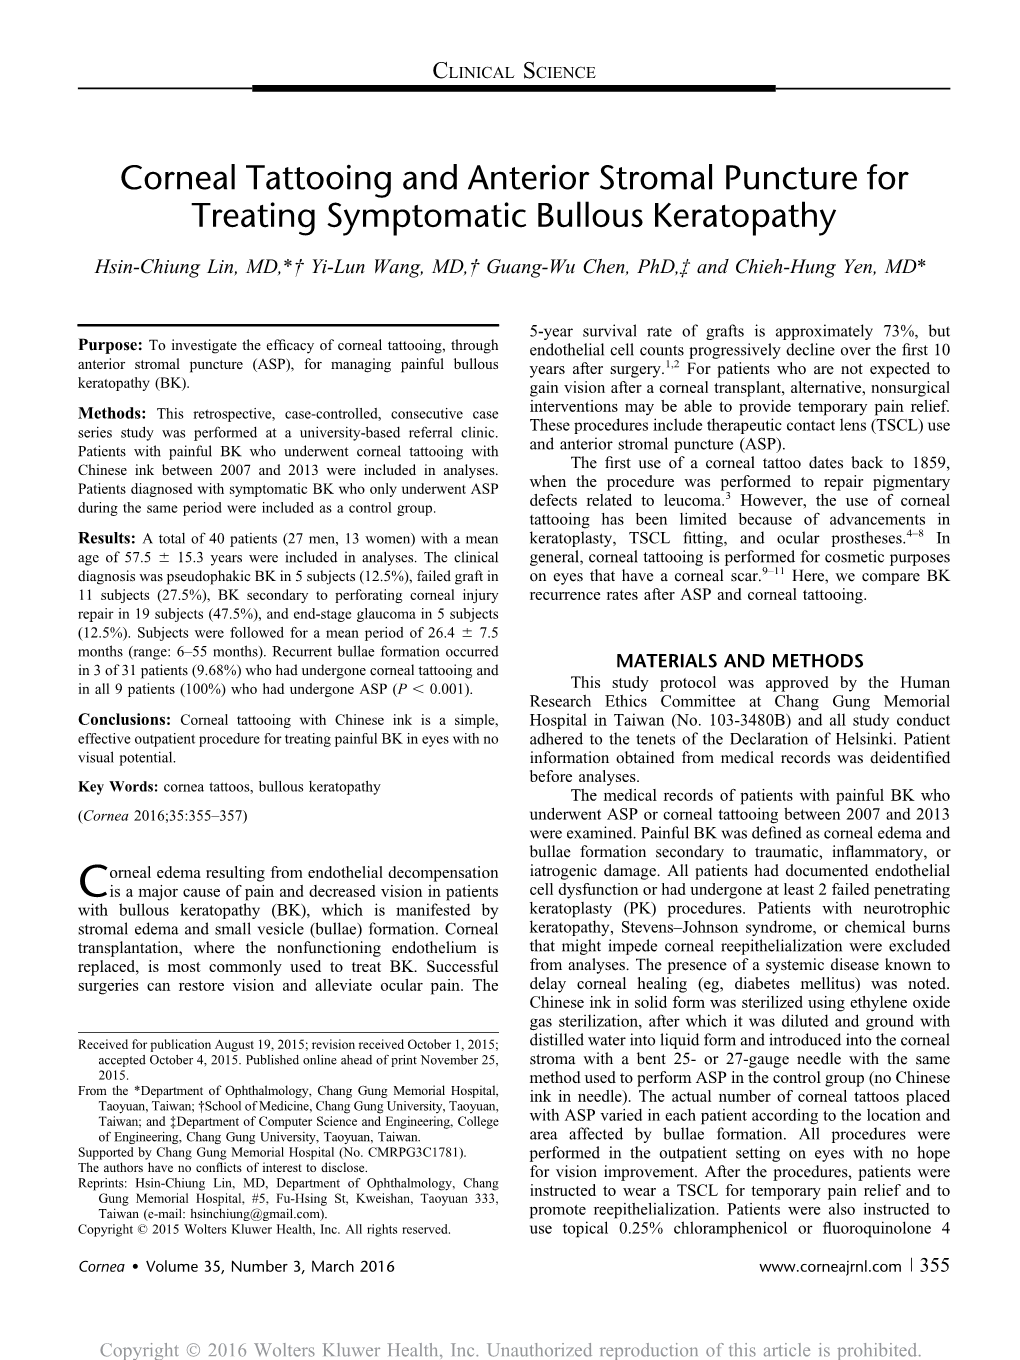 Corneal Tattooing and Anterior Stromal Puncture for Treating Symptomatic Bullous Keratopathy